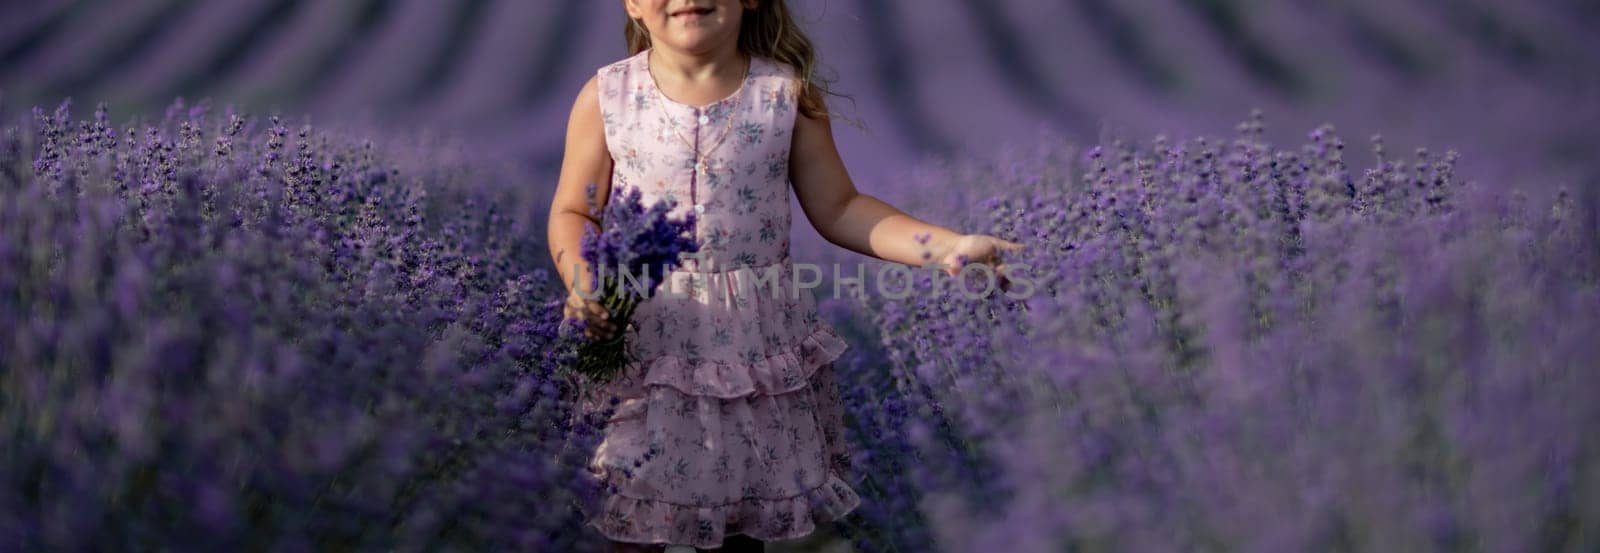 Lavender field girl. happy girl in pink dress in a lilac field of lavender. Aromatherapy concept, lavender oil, photo session in lavender by Matiunina